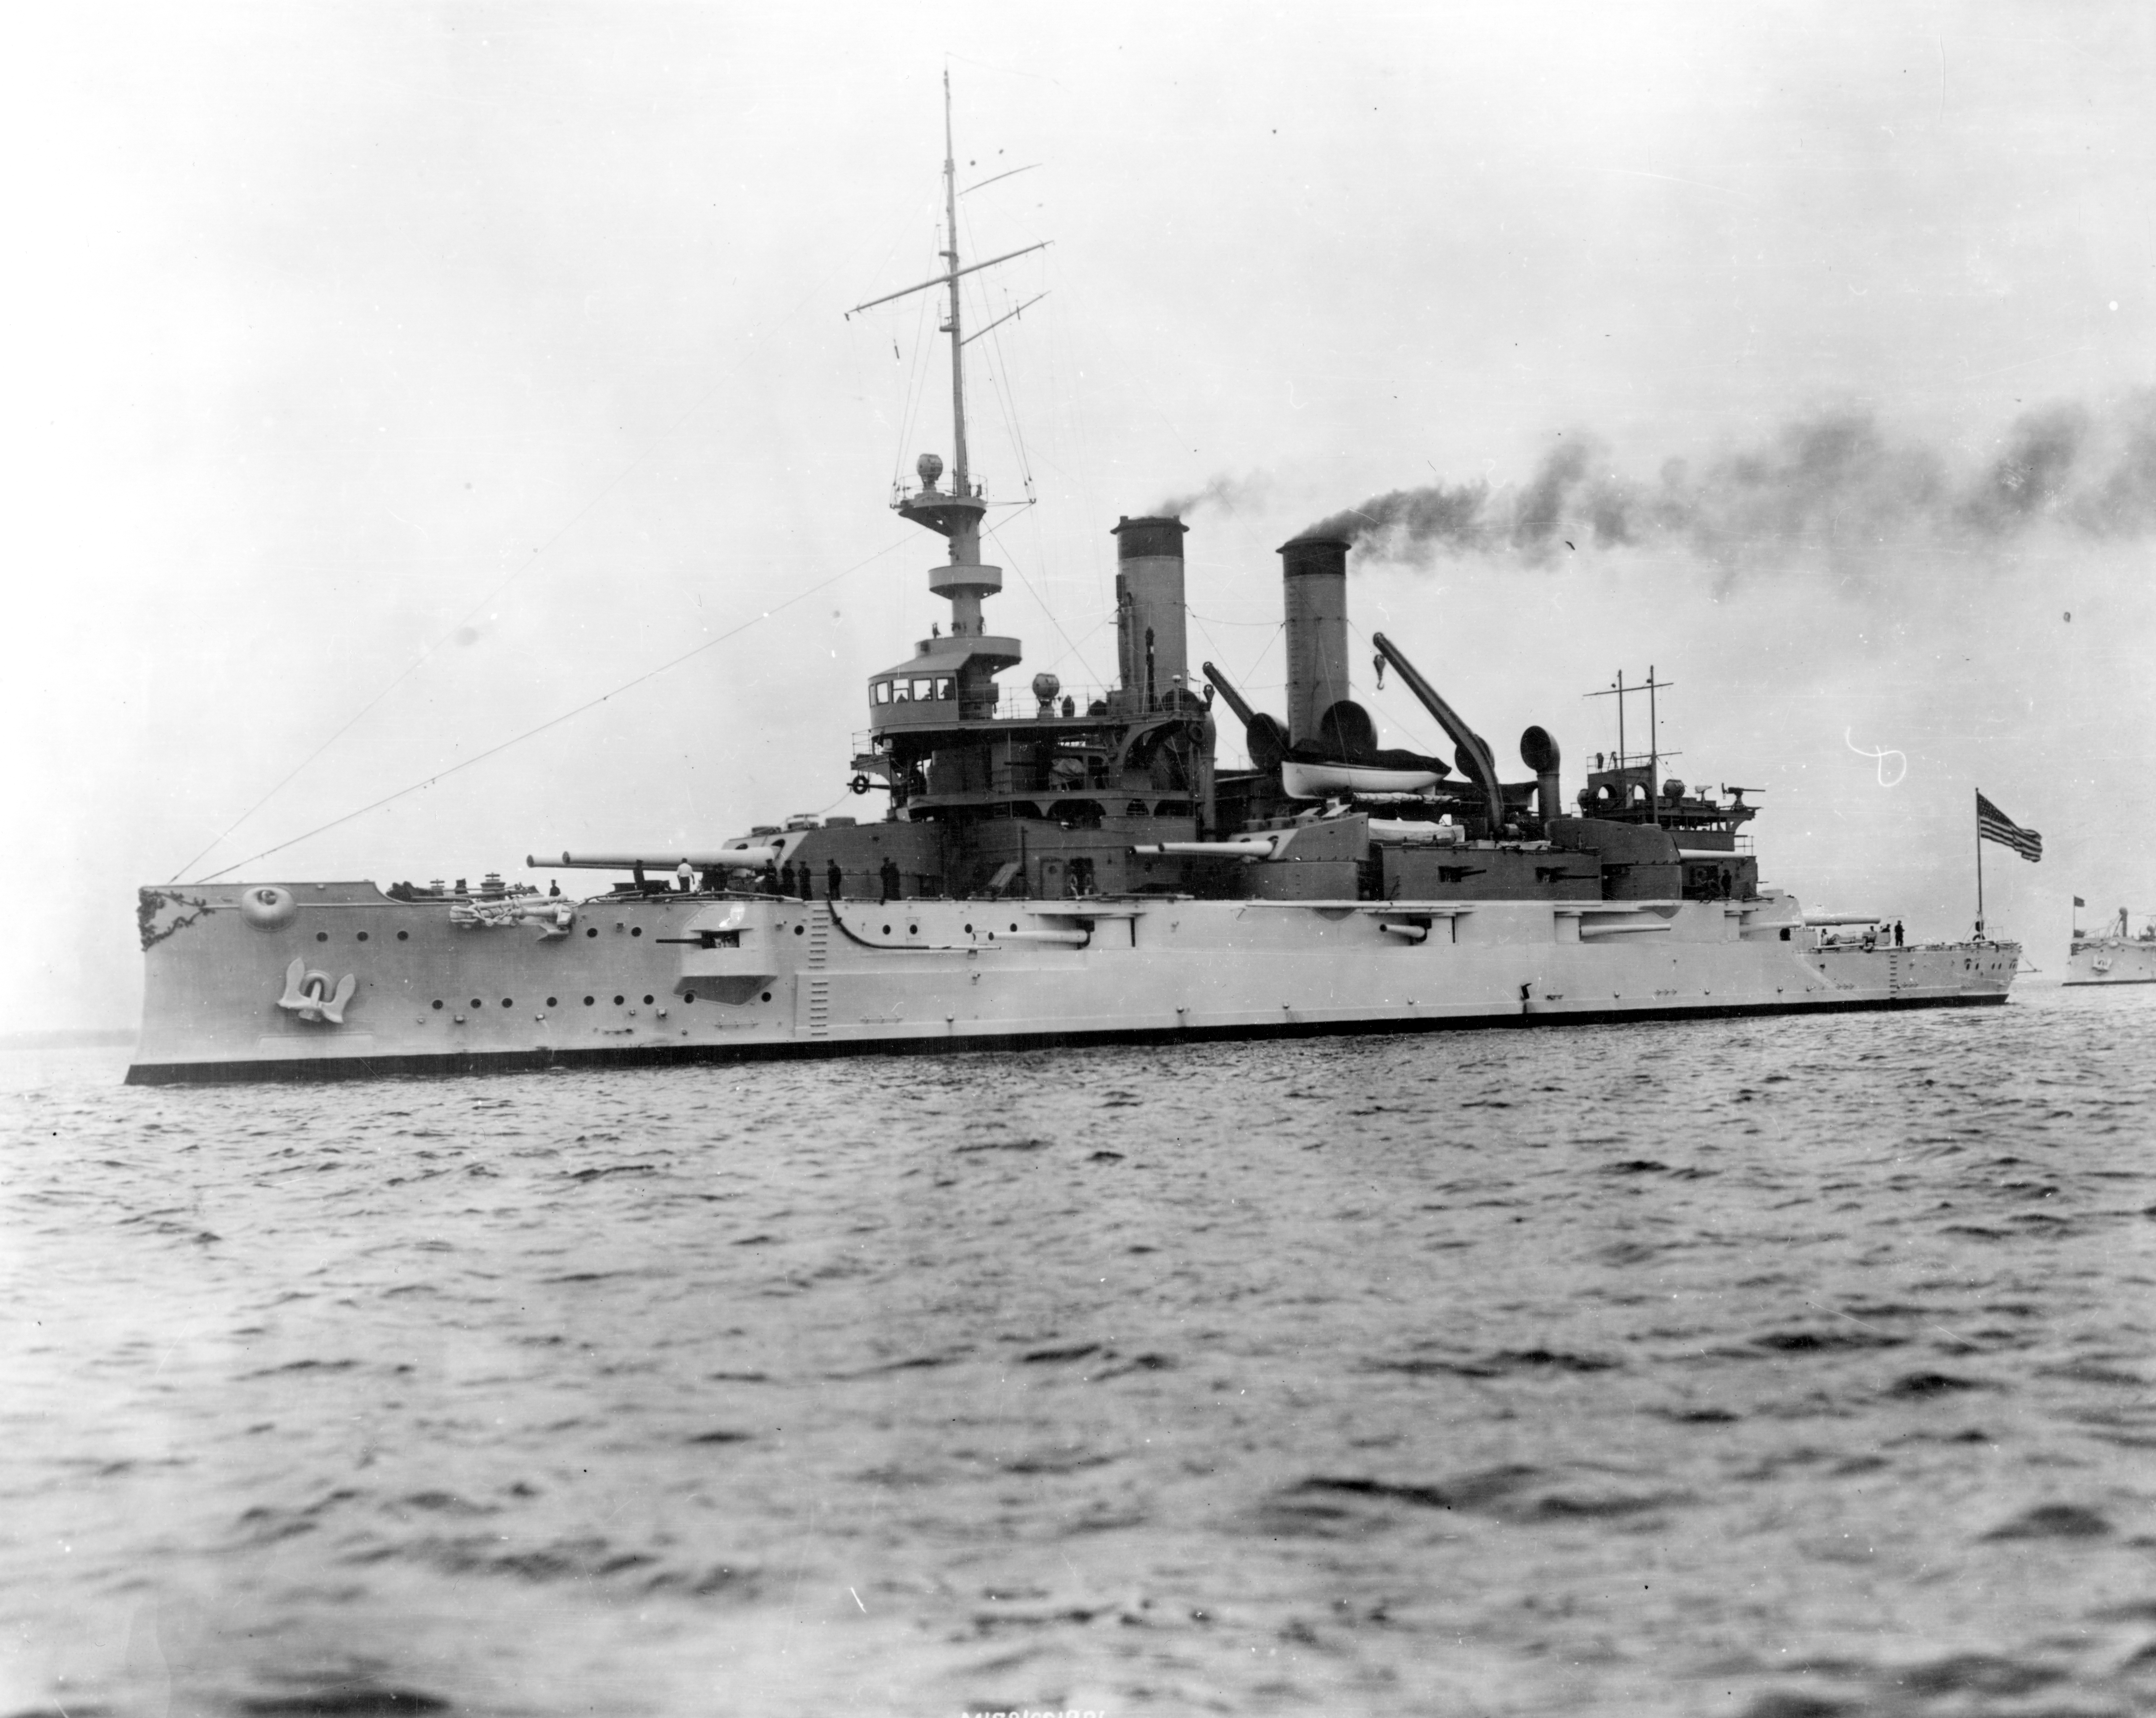 The USS Mississippi